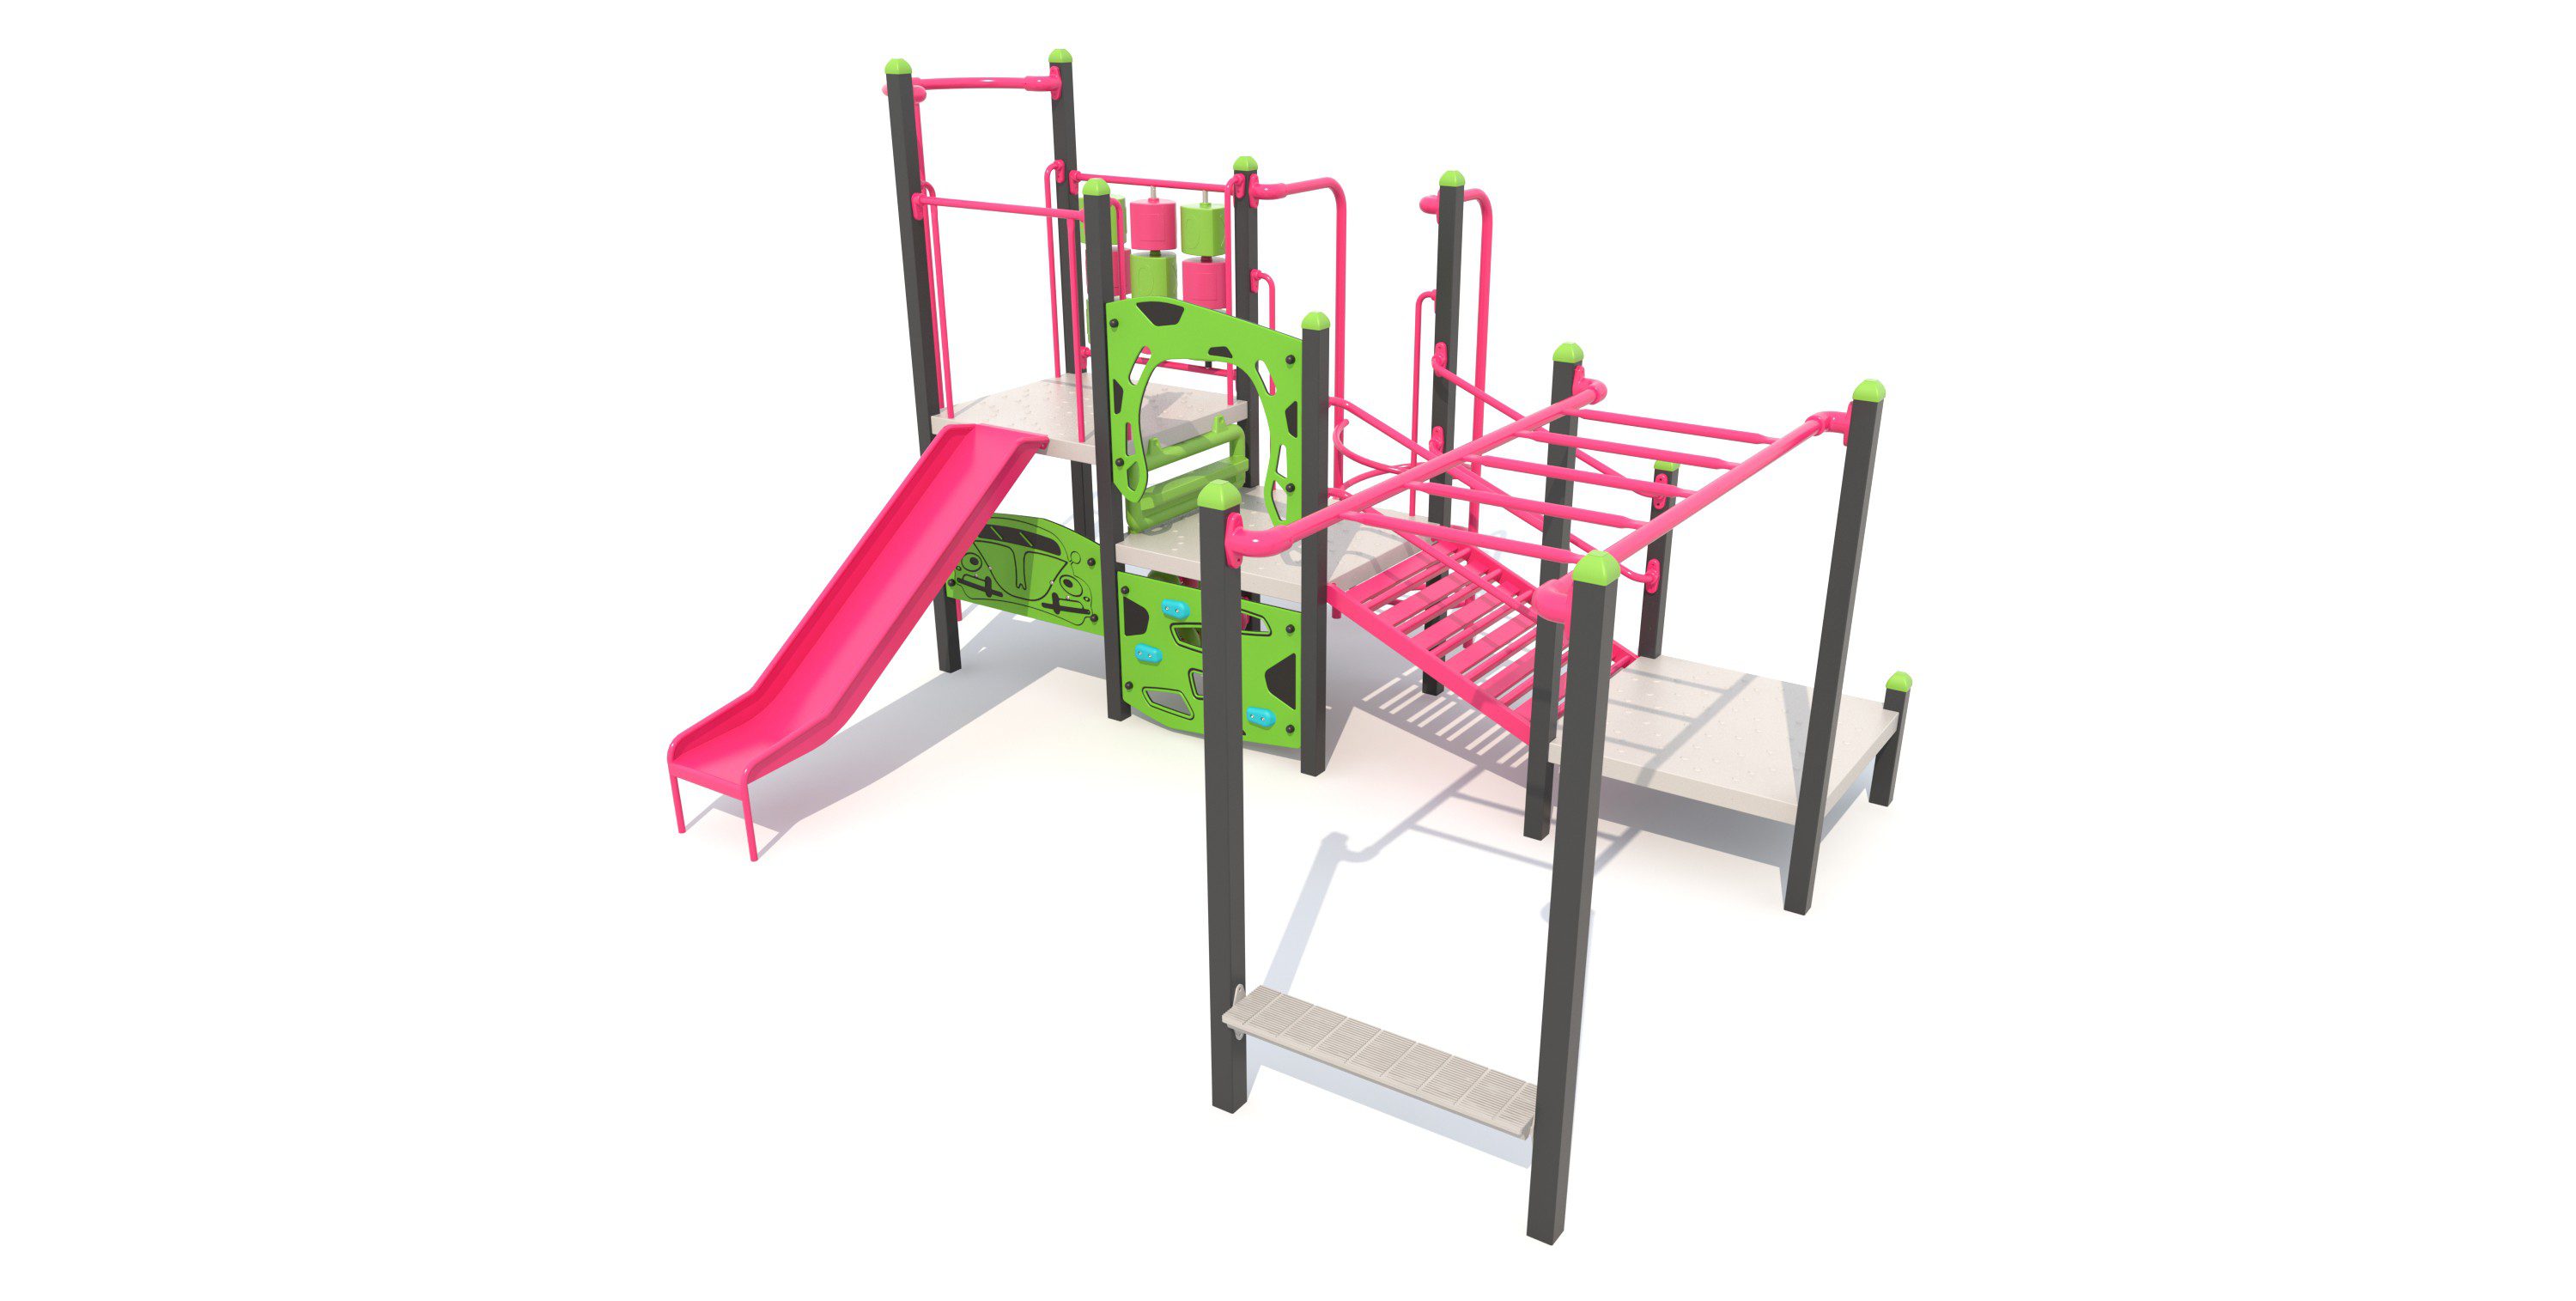 Playtime Square – D62796-1Z